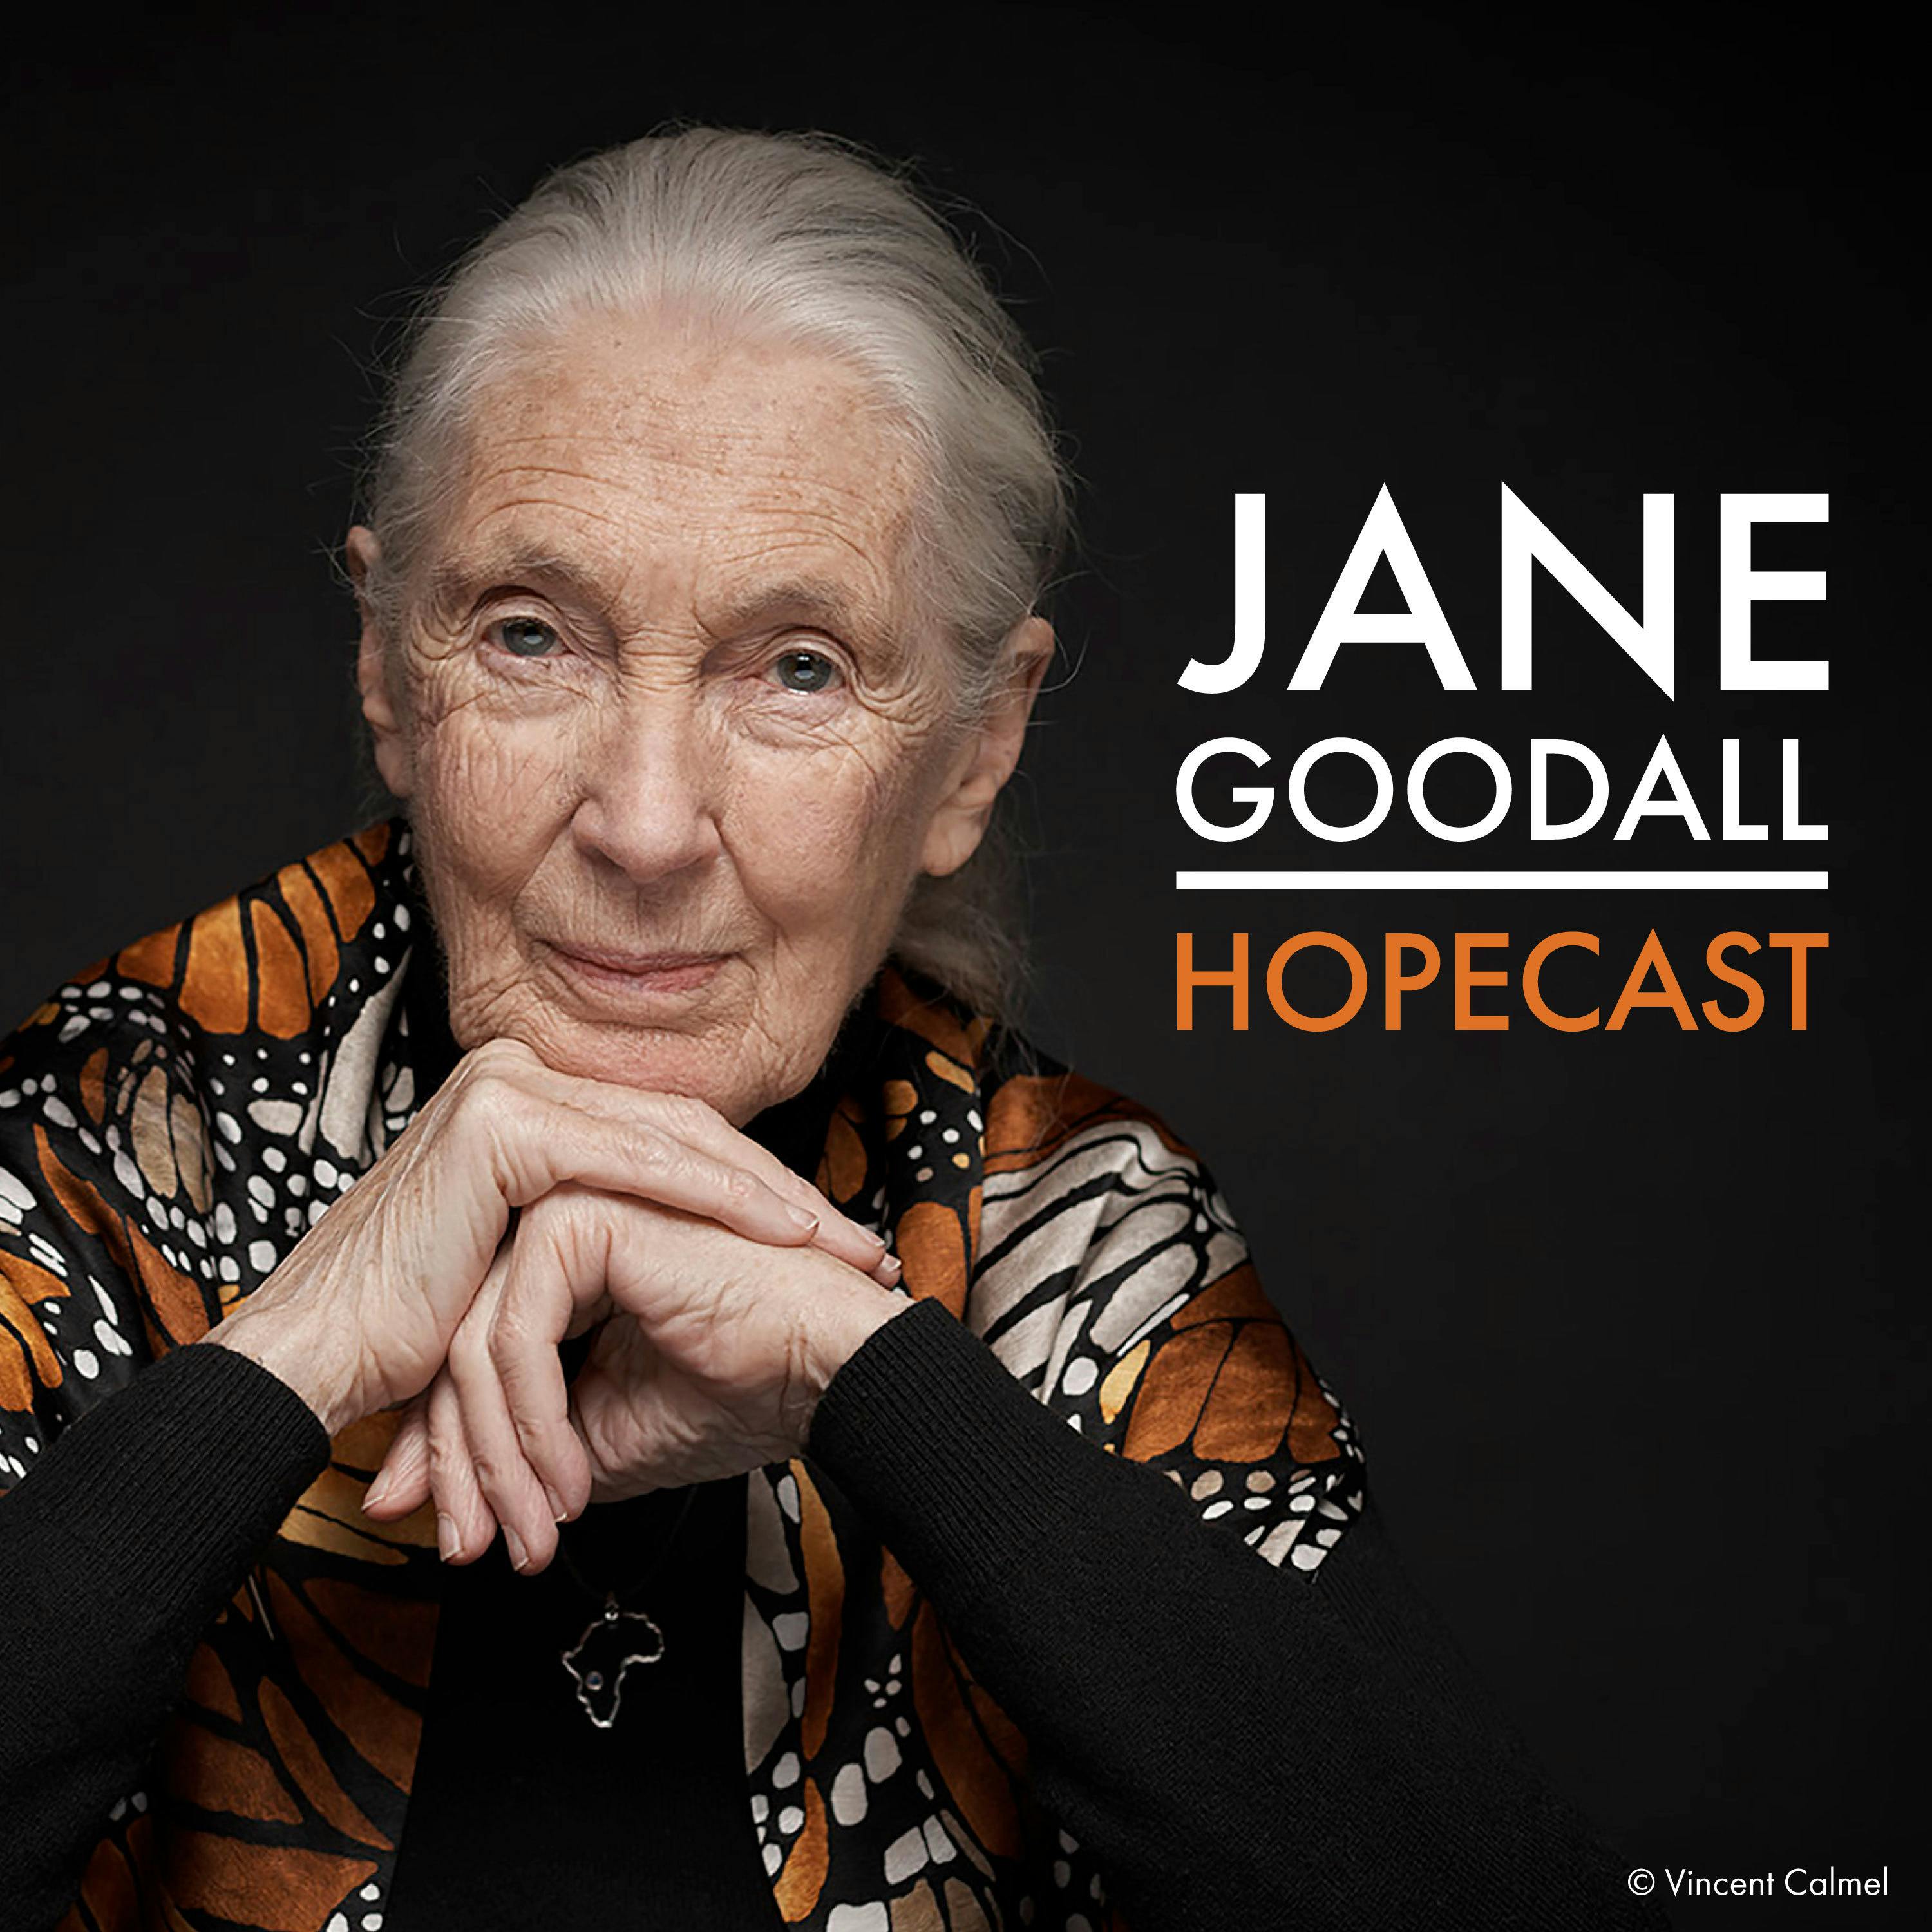 Mailbag: From China to California, Jane Answers Hopecaster Messages About Perseverance and the Indomitable Human Spirit